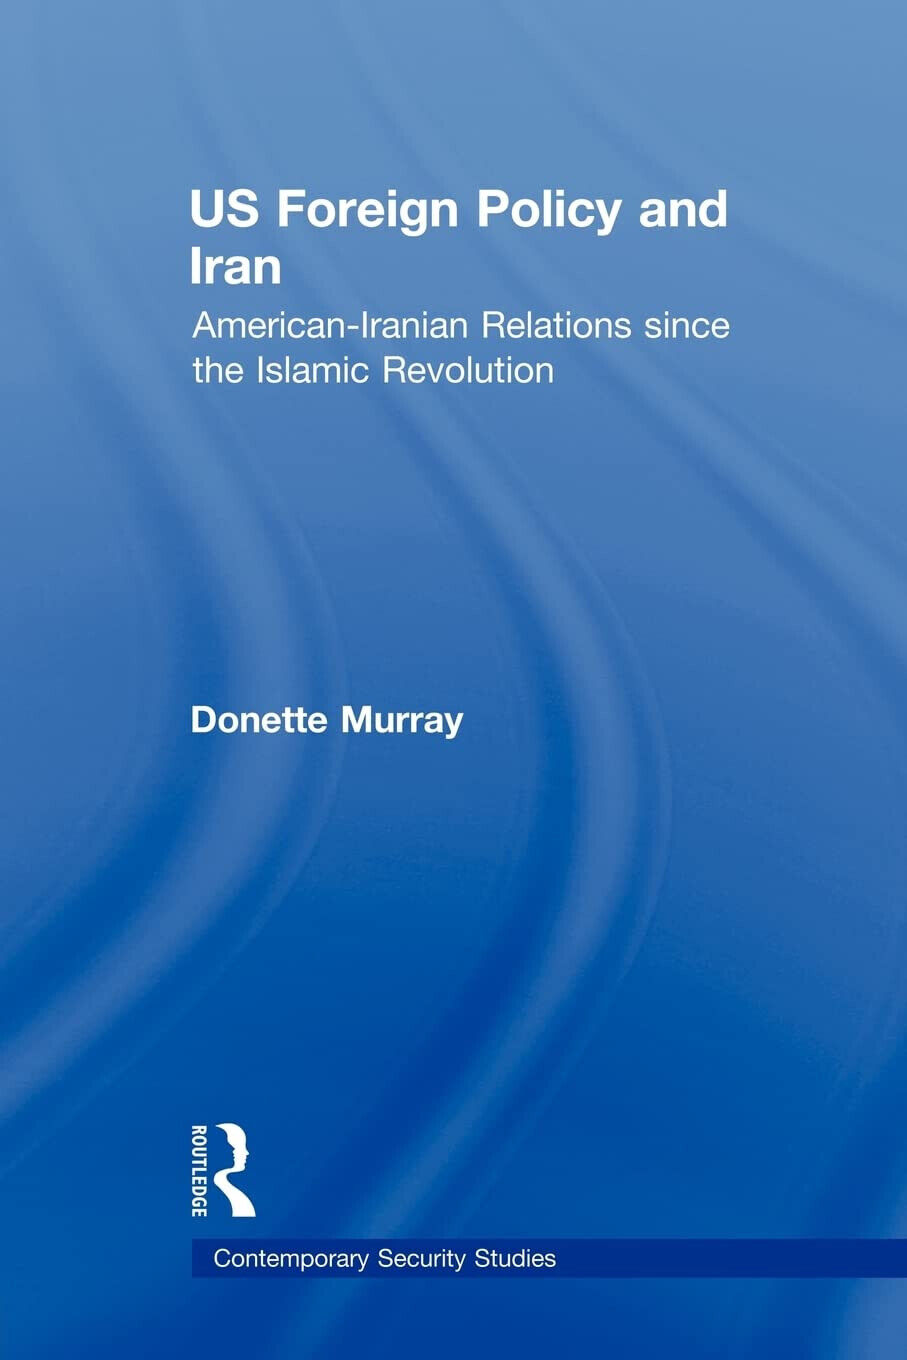 US Foreign Policy and Iran - Donette - Routledge, 2010 libro usato